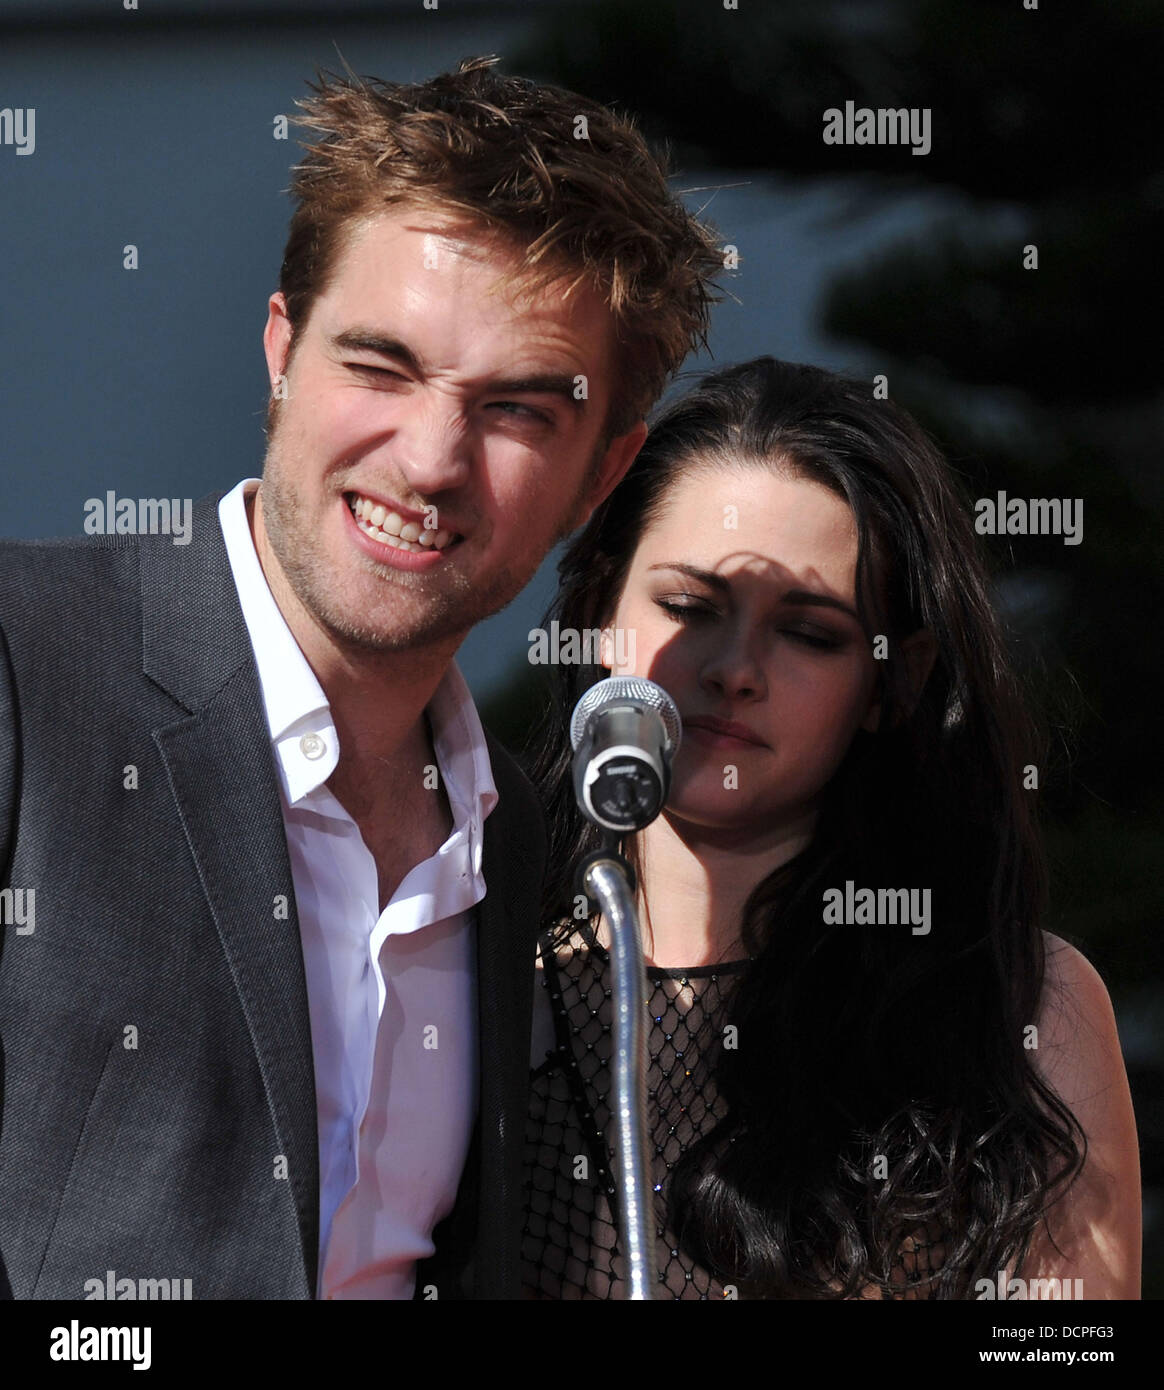 Robert Pattinson + Kristen Stewart + Taylor Lautner  Stars of 'The Twilight Saga' films are honoured with a Hand and Footprint Ceremony outside Grauman's Chinese Theatre  Los Angeles, California - 03.11.11 Stock Photo